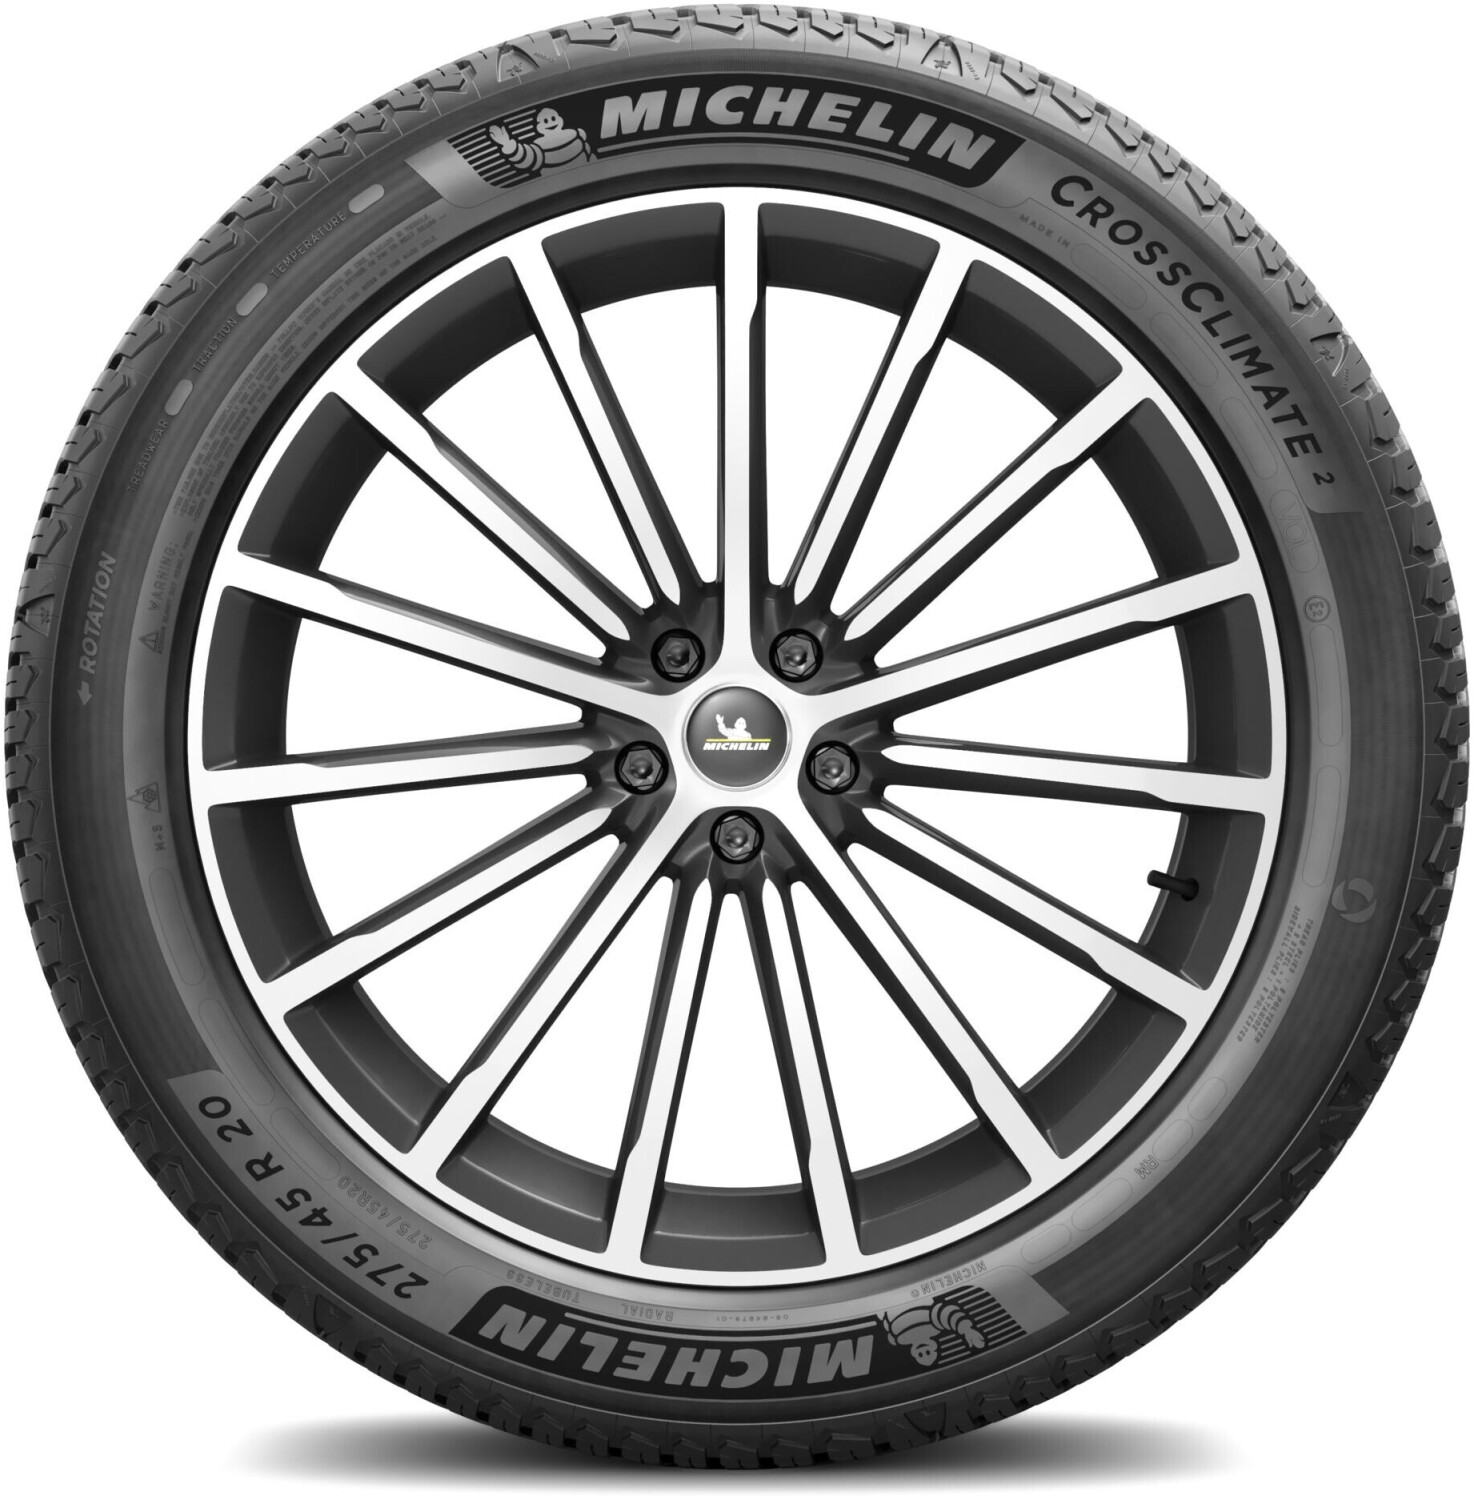 Buy Michelin Cross Climate 2 275/45 R20 110H XL VOL from £233.24 (Today) –  Best Deals on